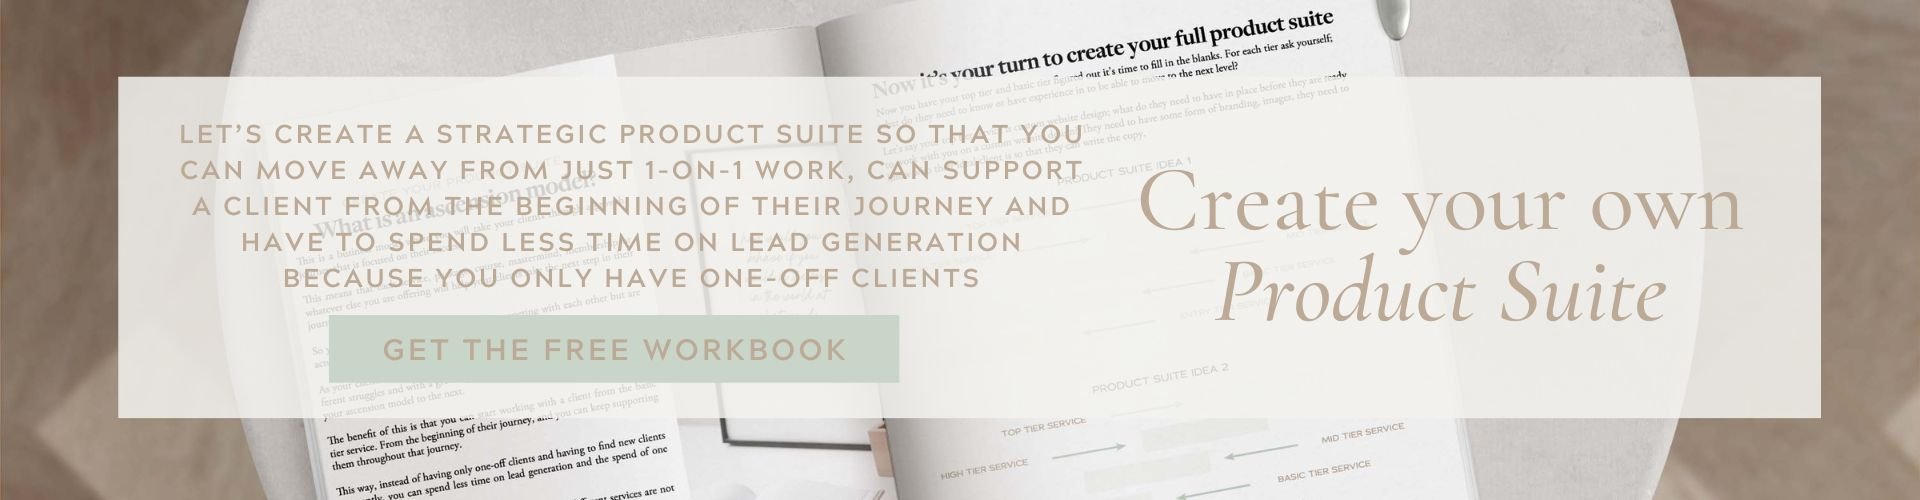 Free Resource - How to create your product suite by Flourish Online Management - Full Image.jpg (Copy)